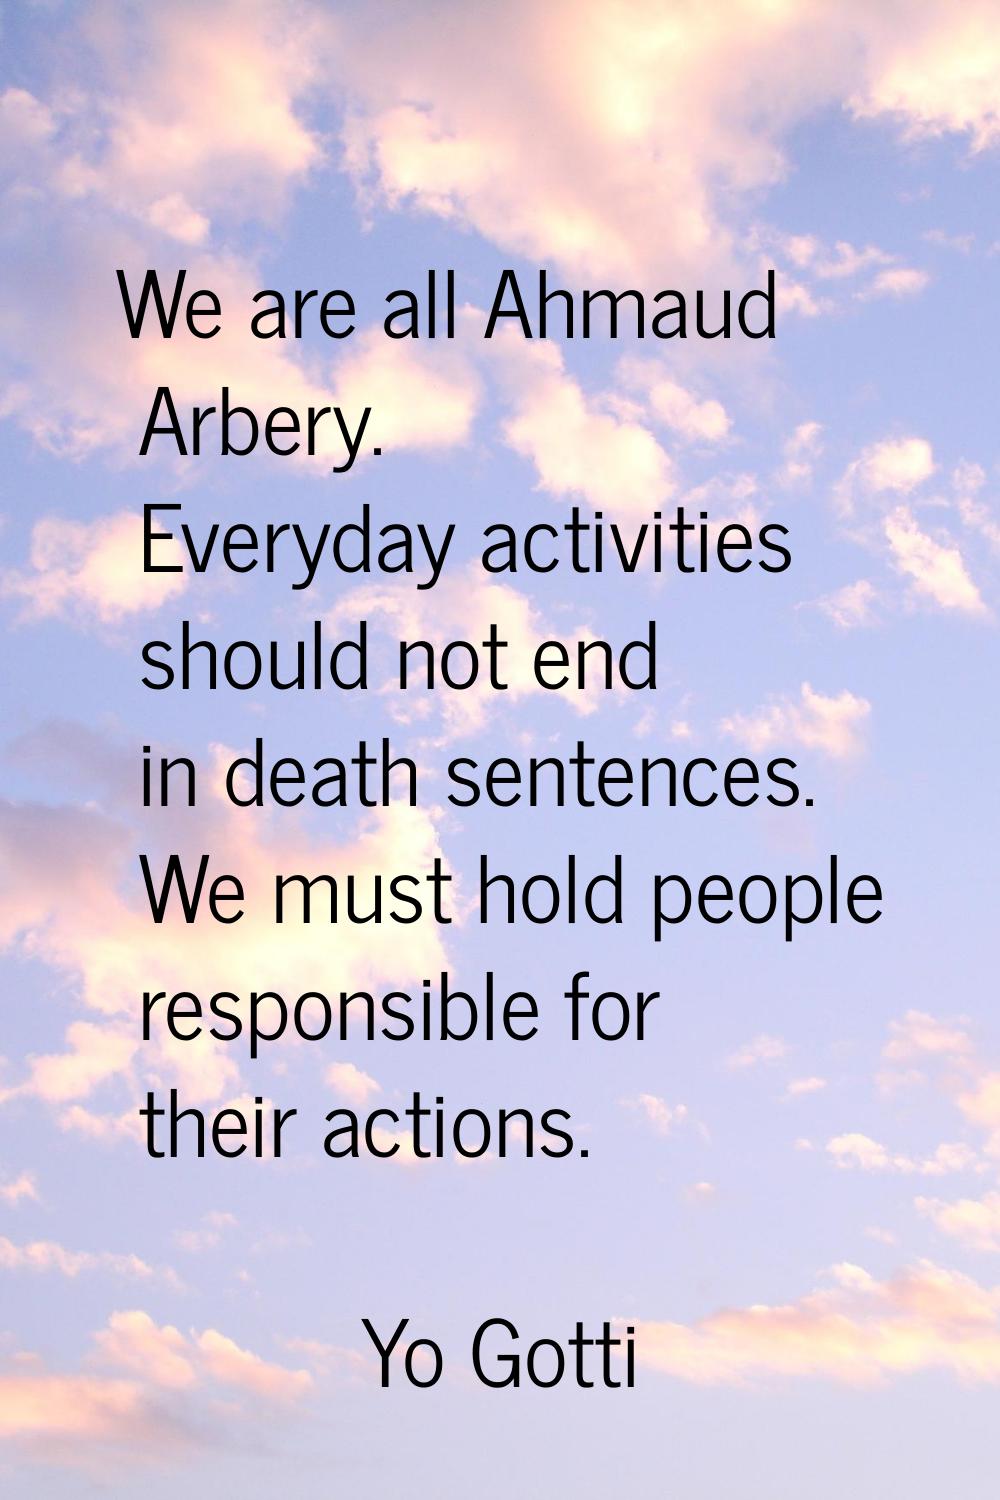 We are all Ahmaud Arbery. Everyday activities should not end in death sentences. We must hold peopl